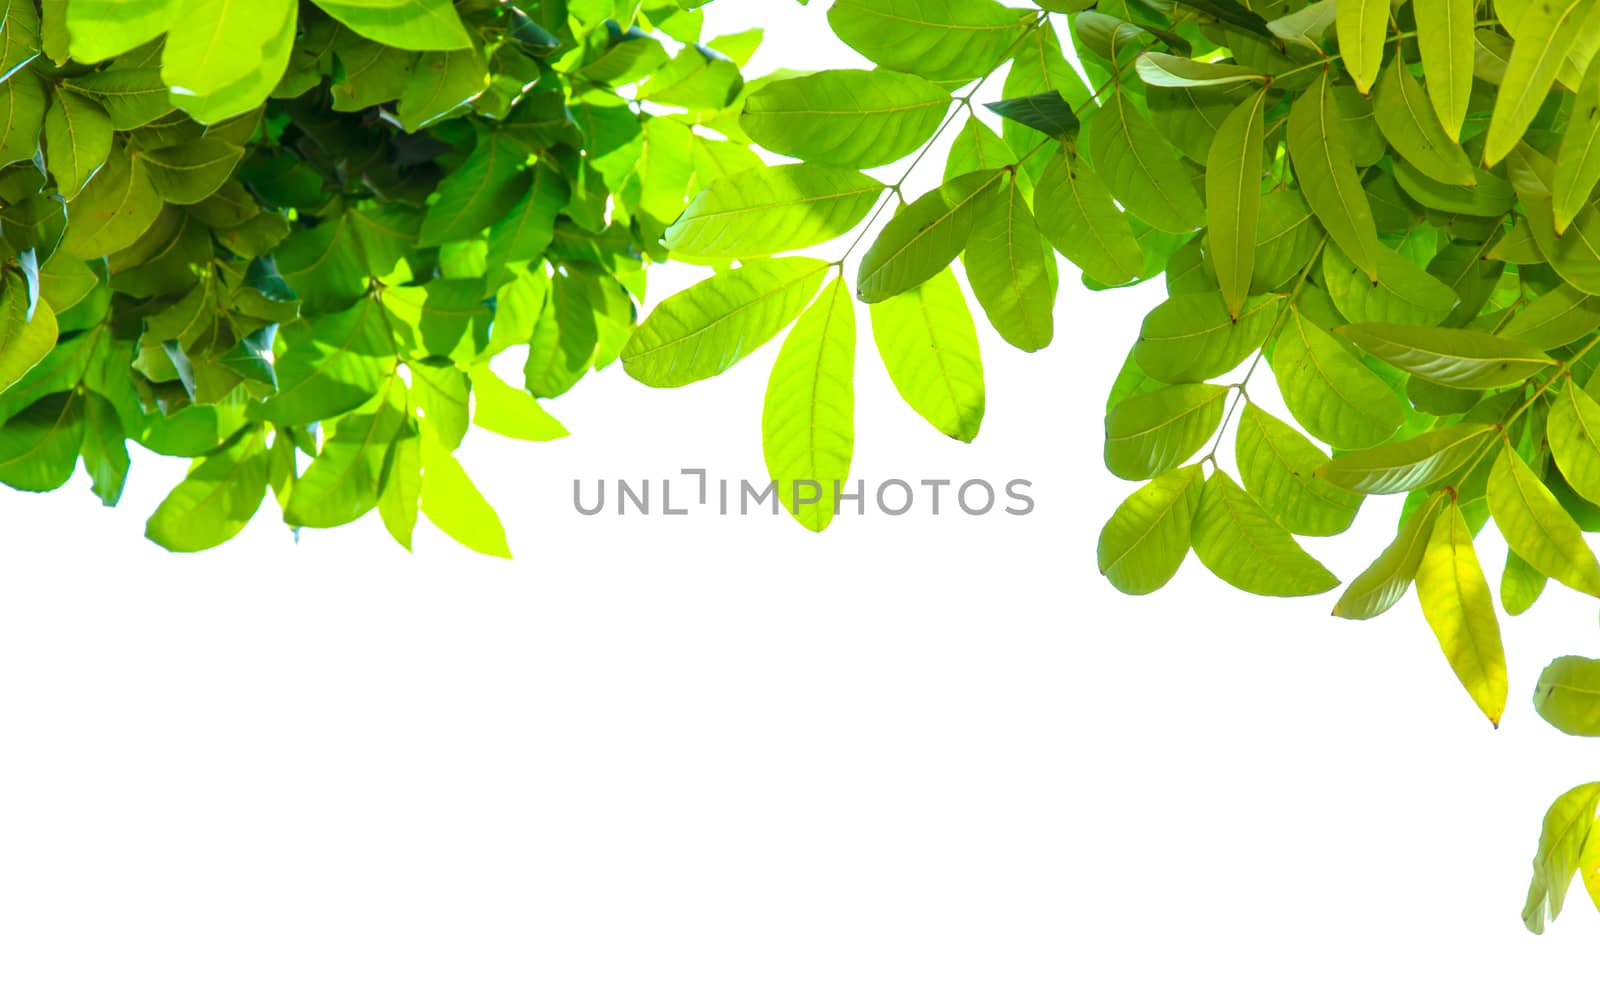 The green leaves isolated on white background.